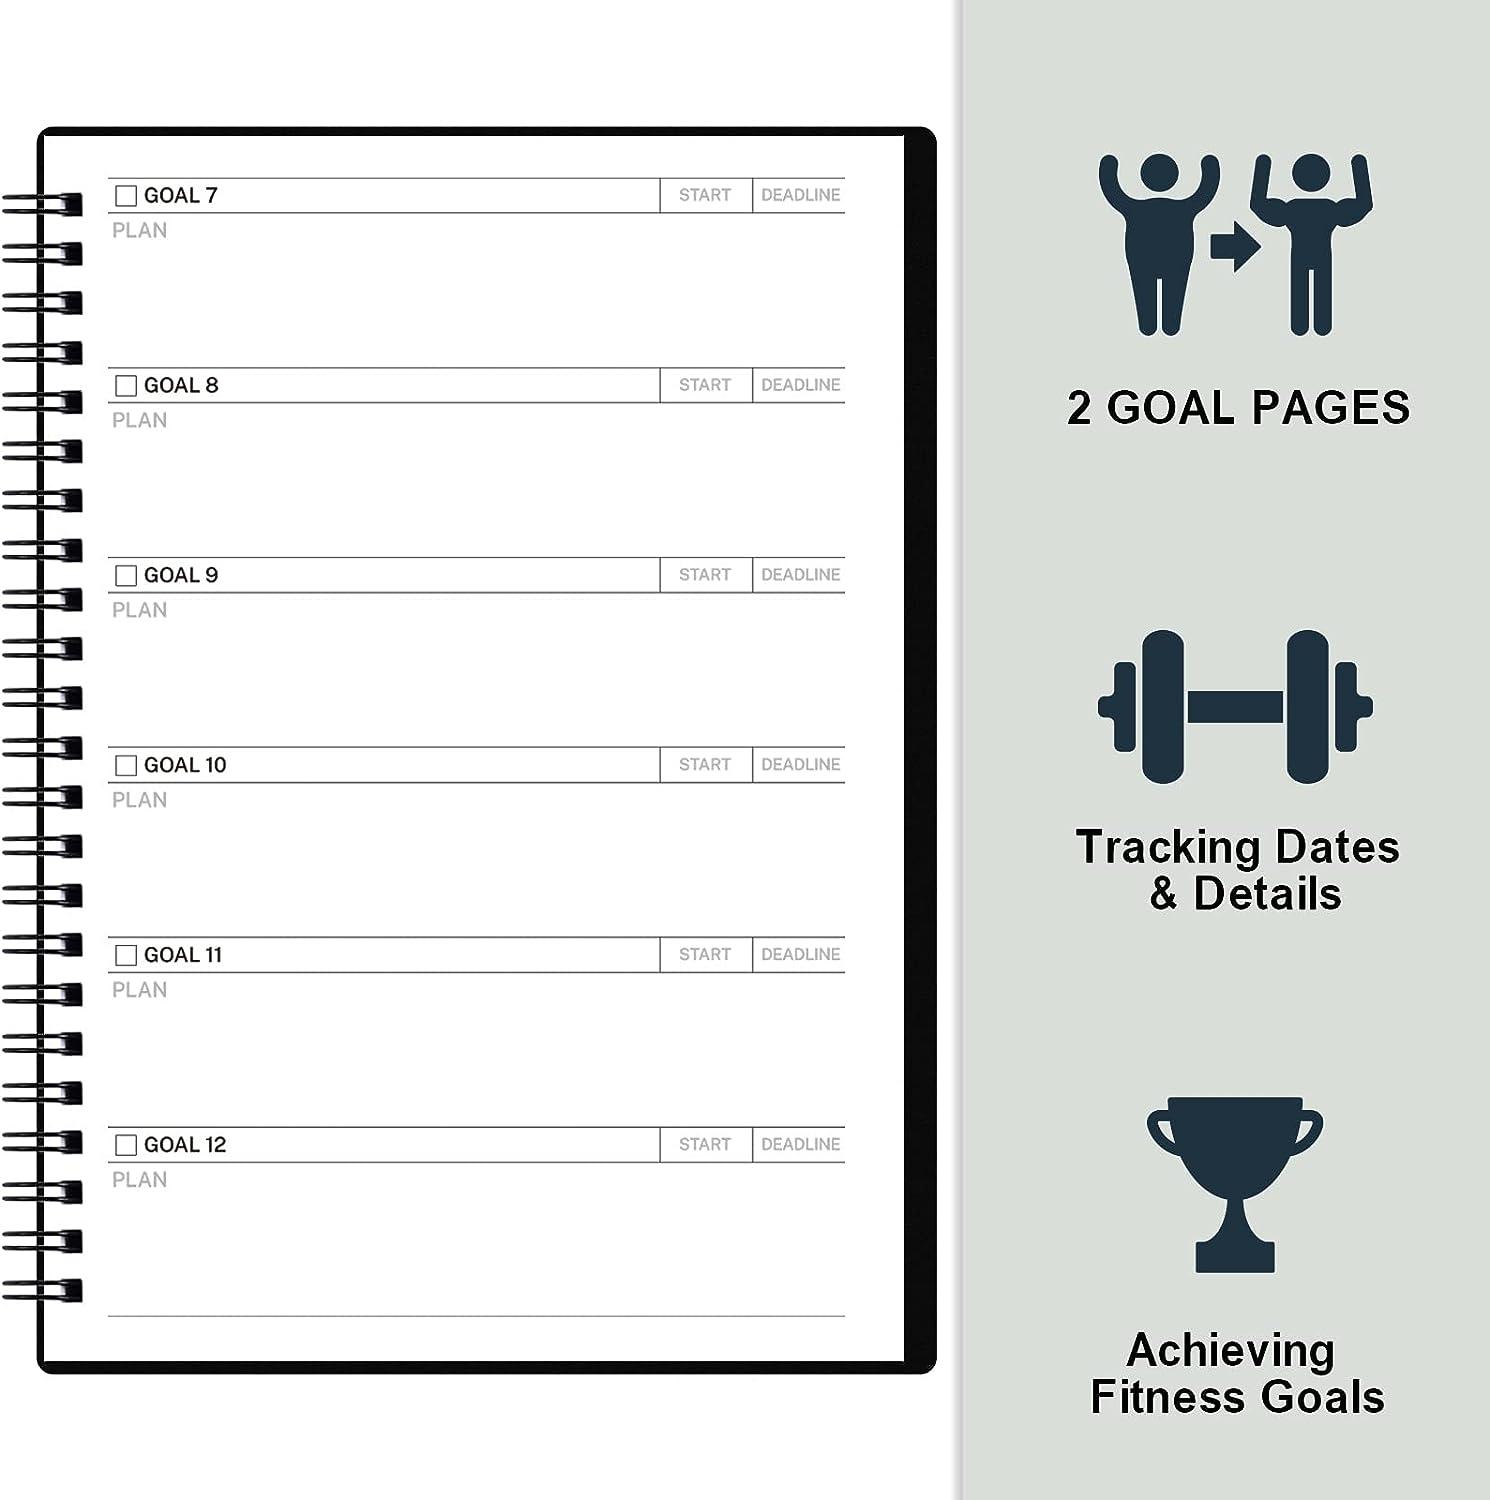 Fitness Journal Printable Page, Weekly Workout Planner Template